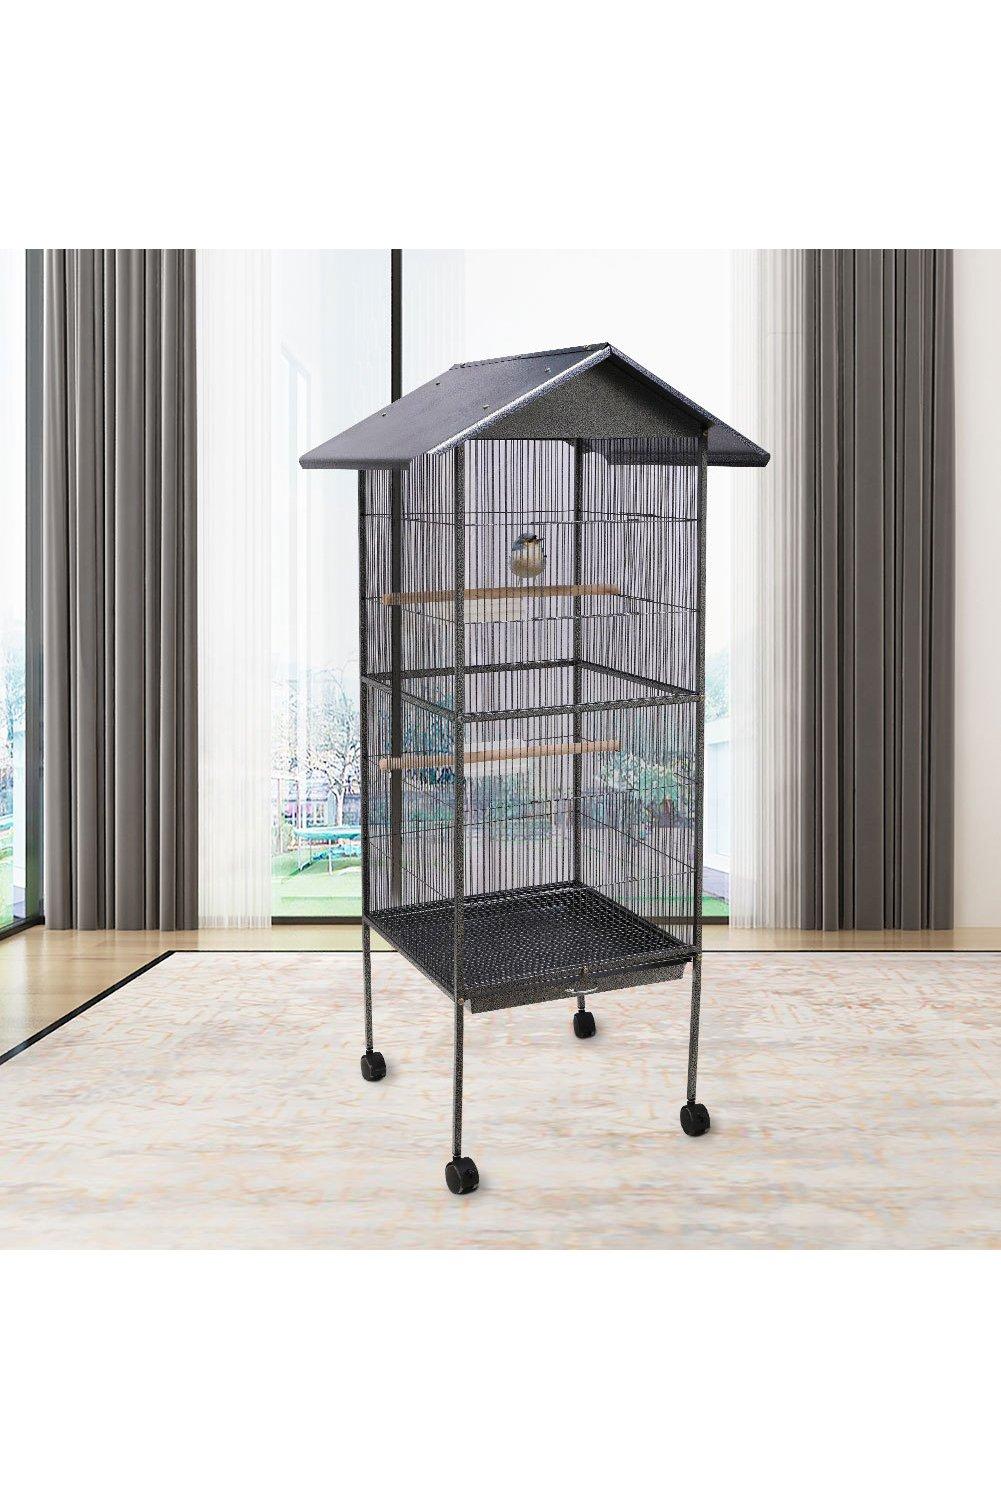 160cm Metal Frame Bird Play Stand with Feeding Bowls and Ladders